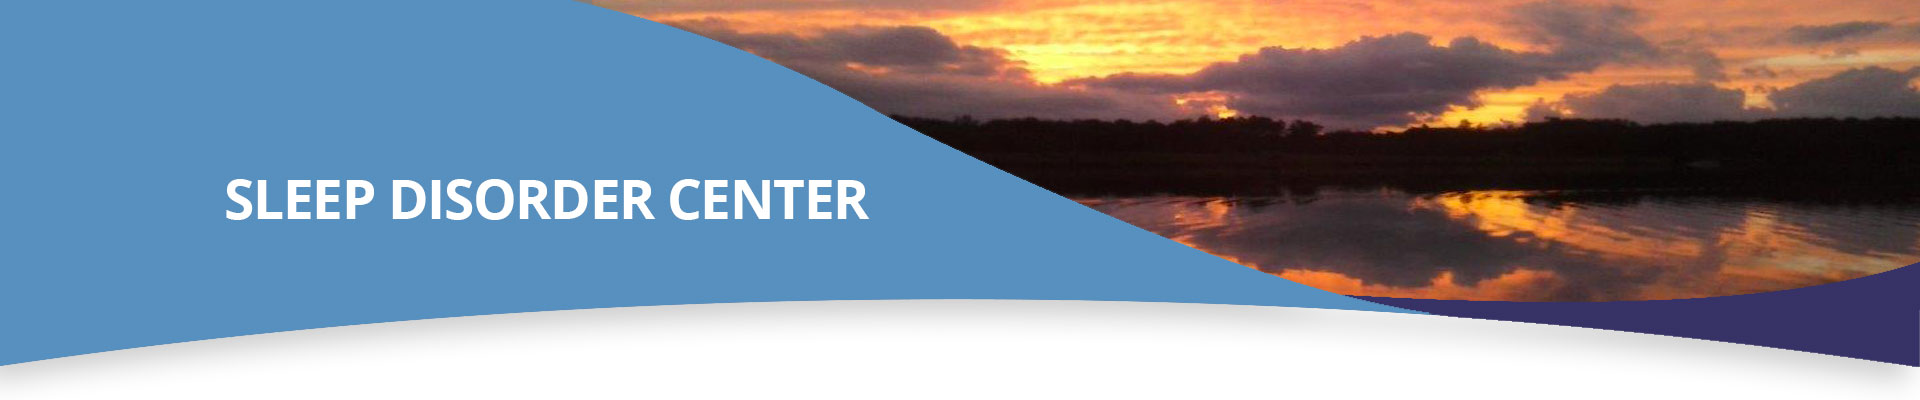 Banner picture of a beautiful sunset reflection over the water. Banner says:

SLEEP DISORDER CENTER